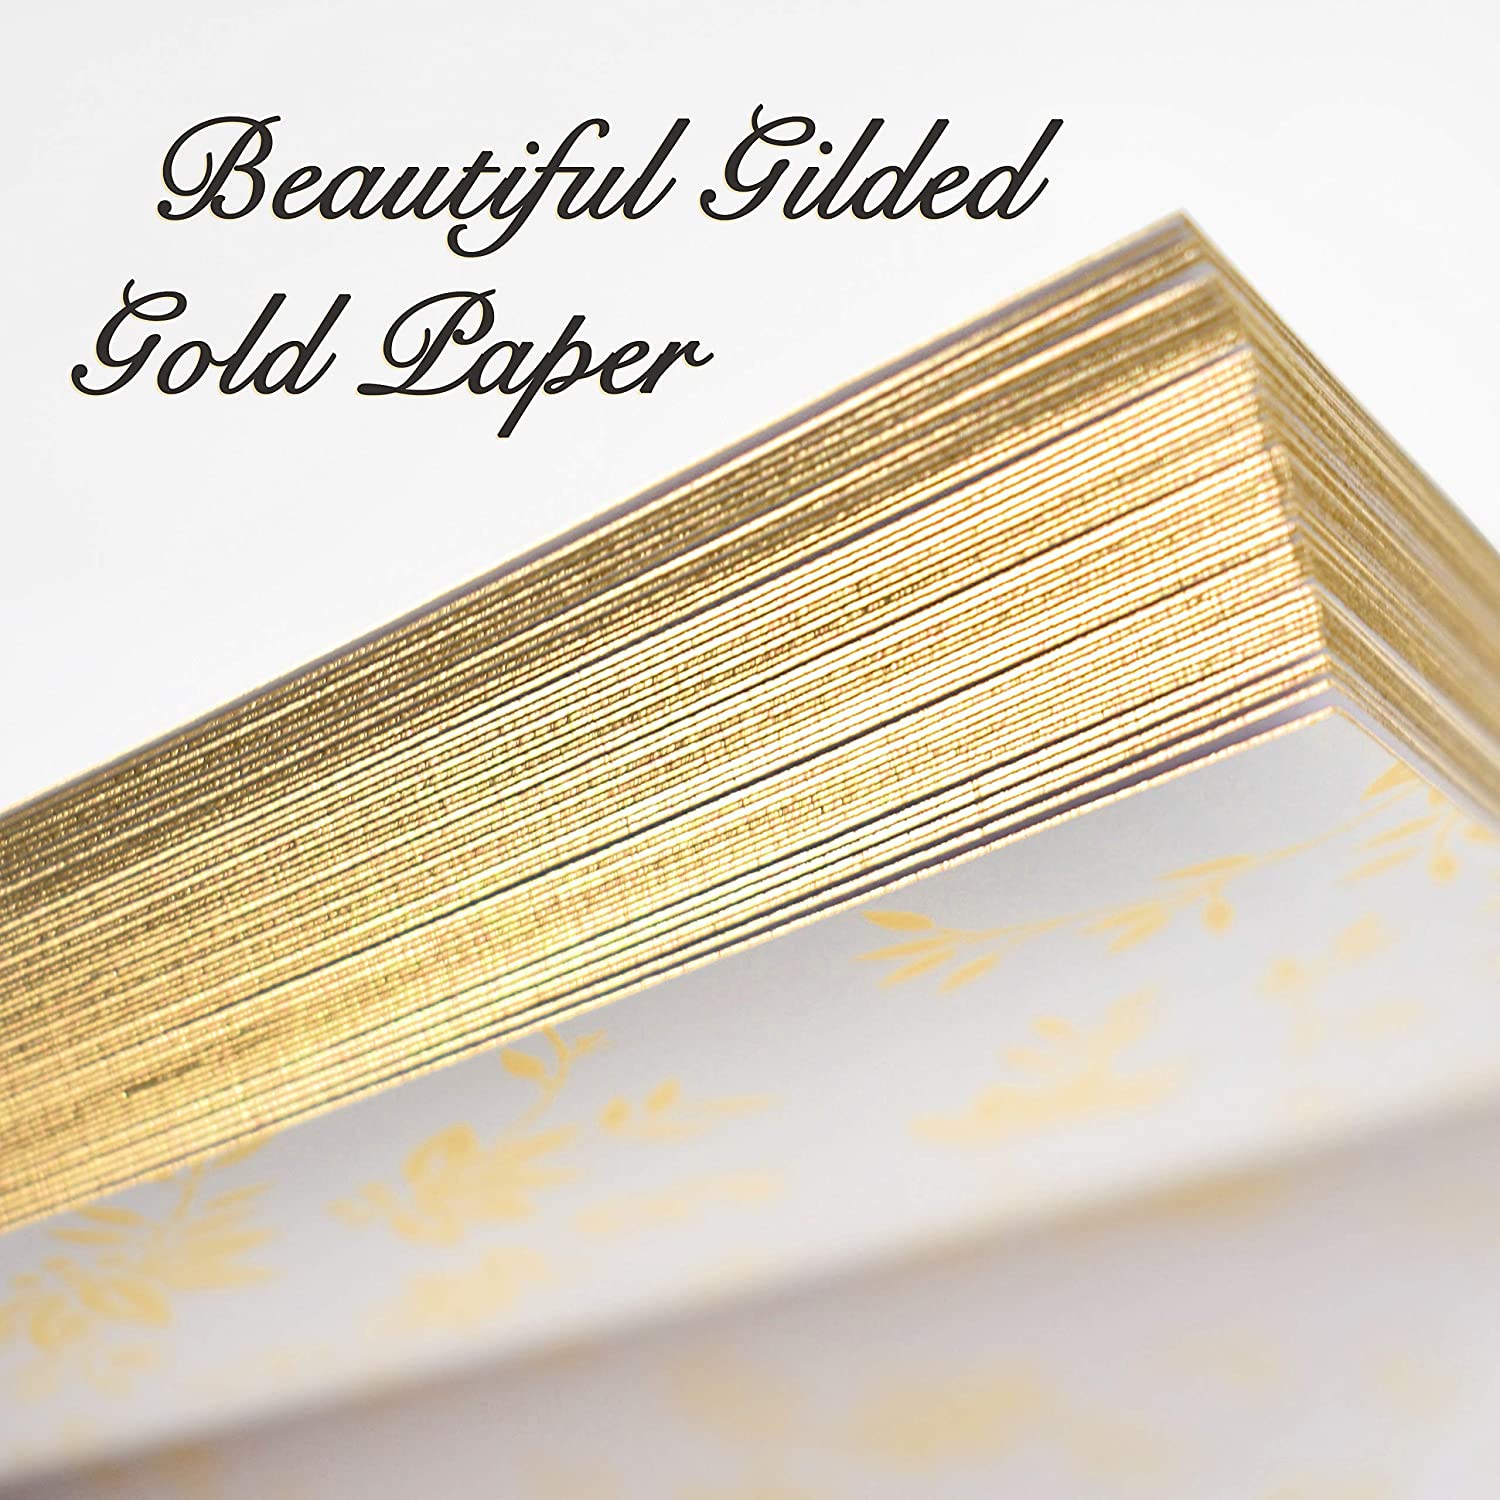 Wedding Guest Book Photo Album Sign in with Gold Foil Hard Cover Book with Thick White Paper